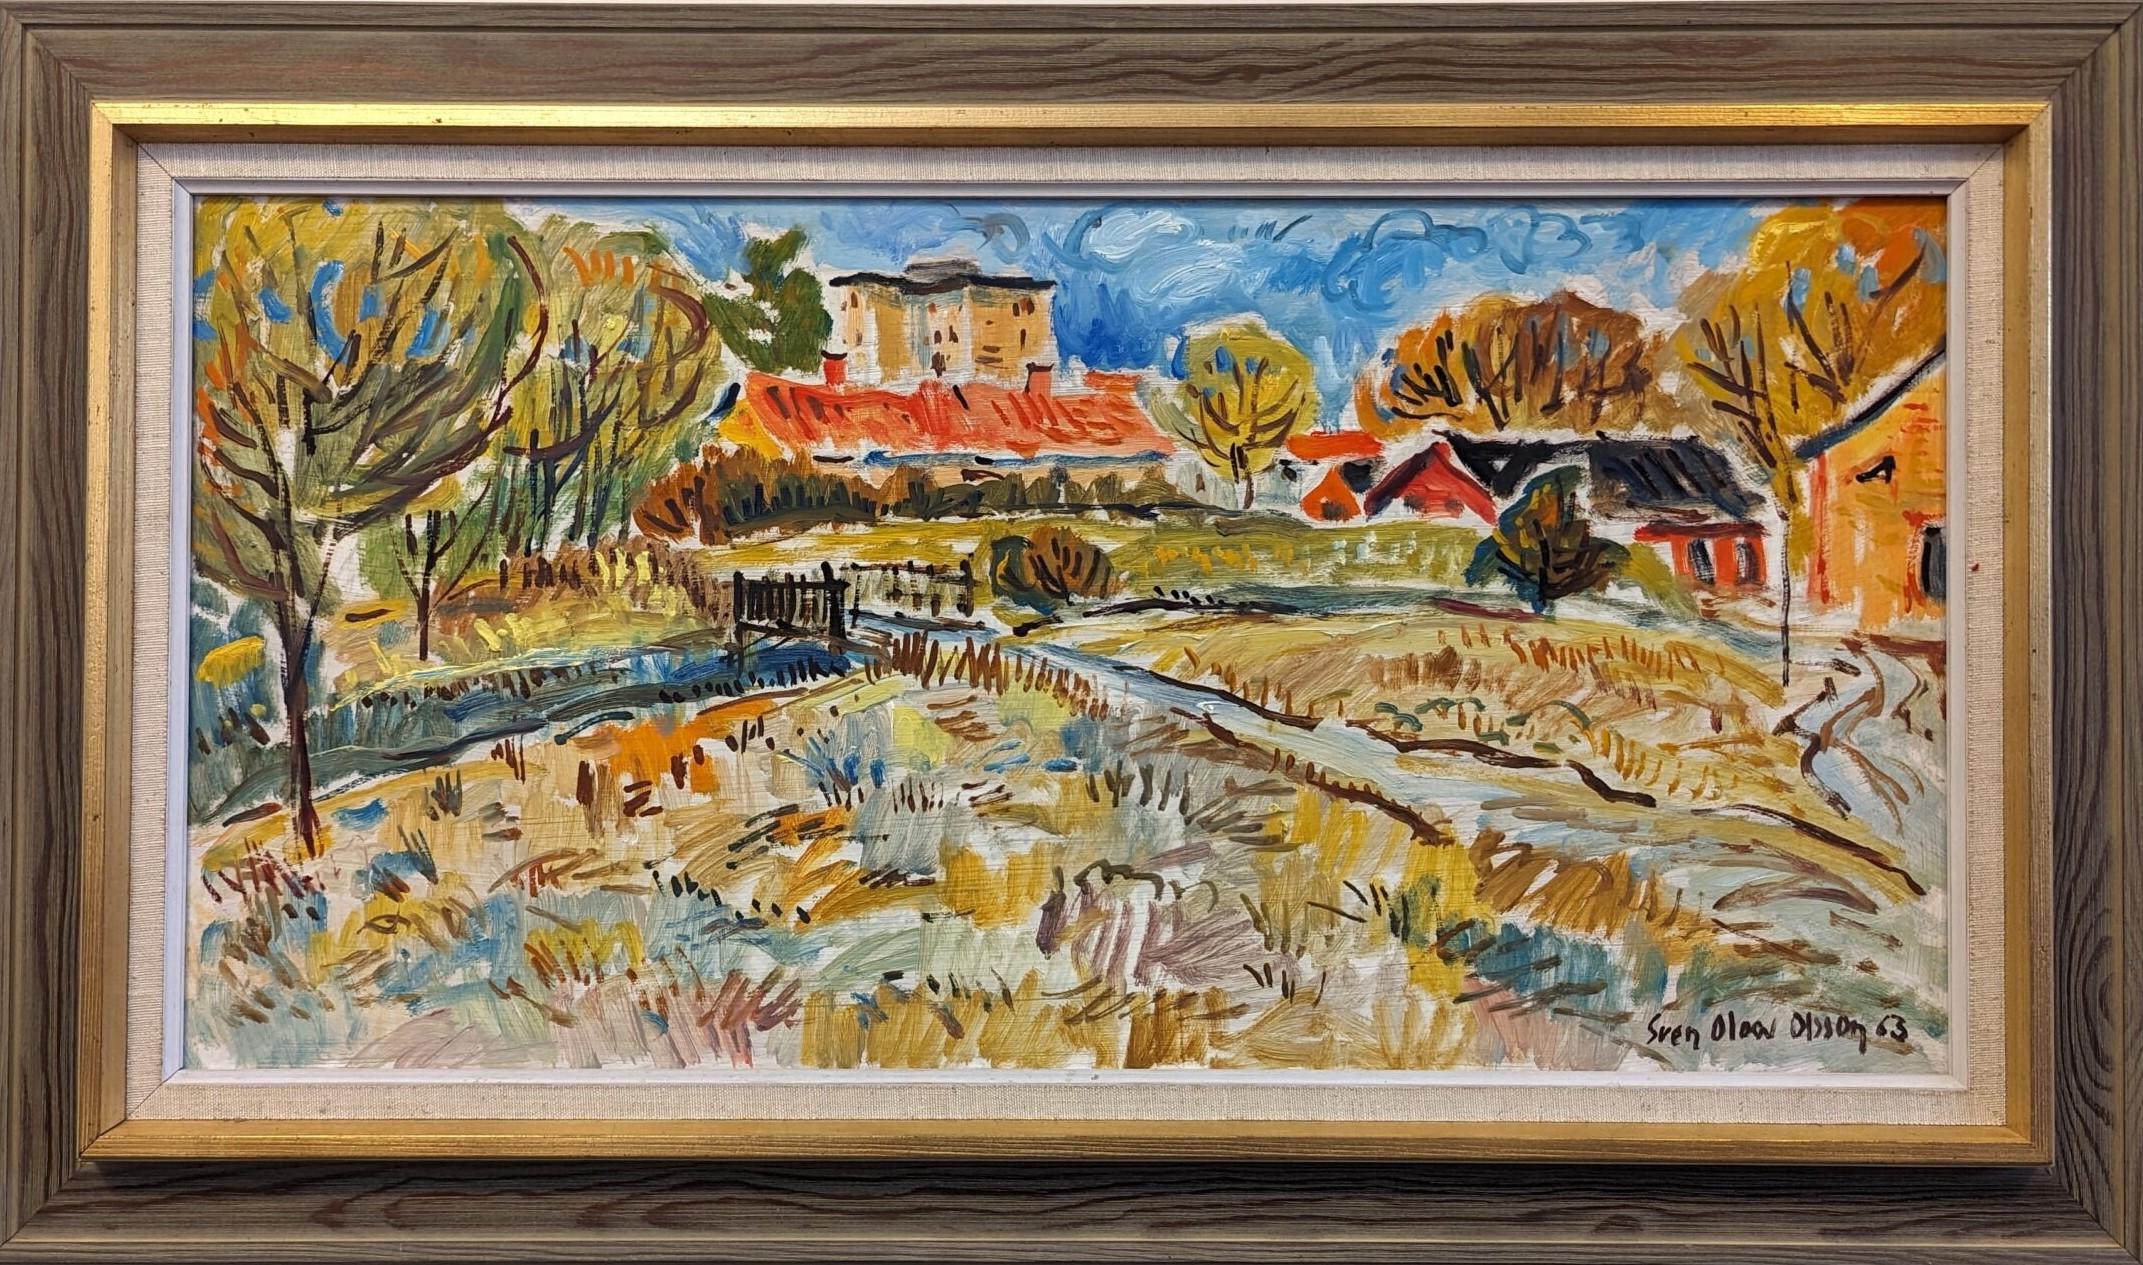 Unknown Landscape Painting - Vintage Mid-Century Modern Swedish Landscape Framed Oil Painting - Fauvist Field